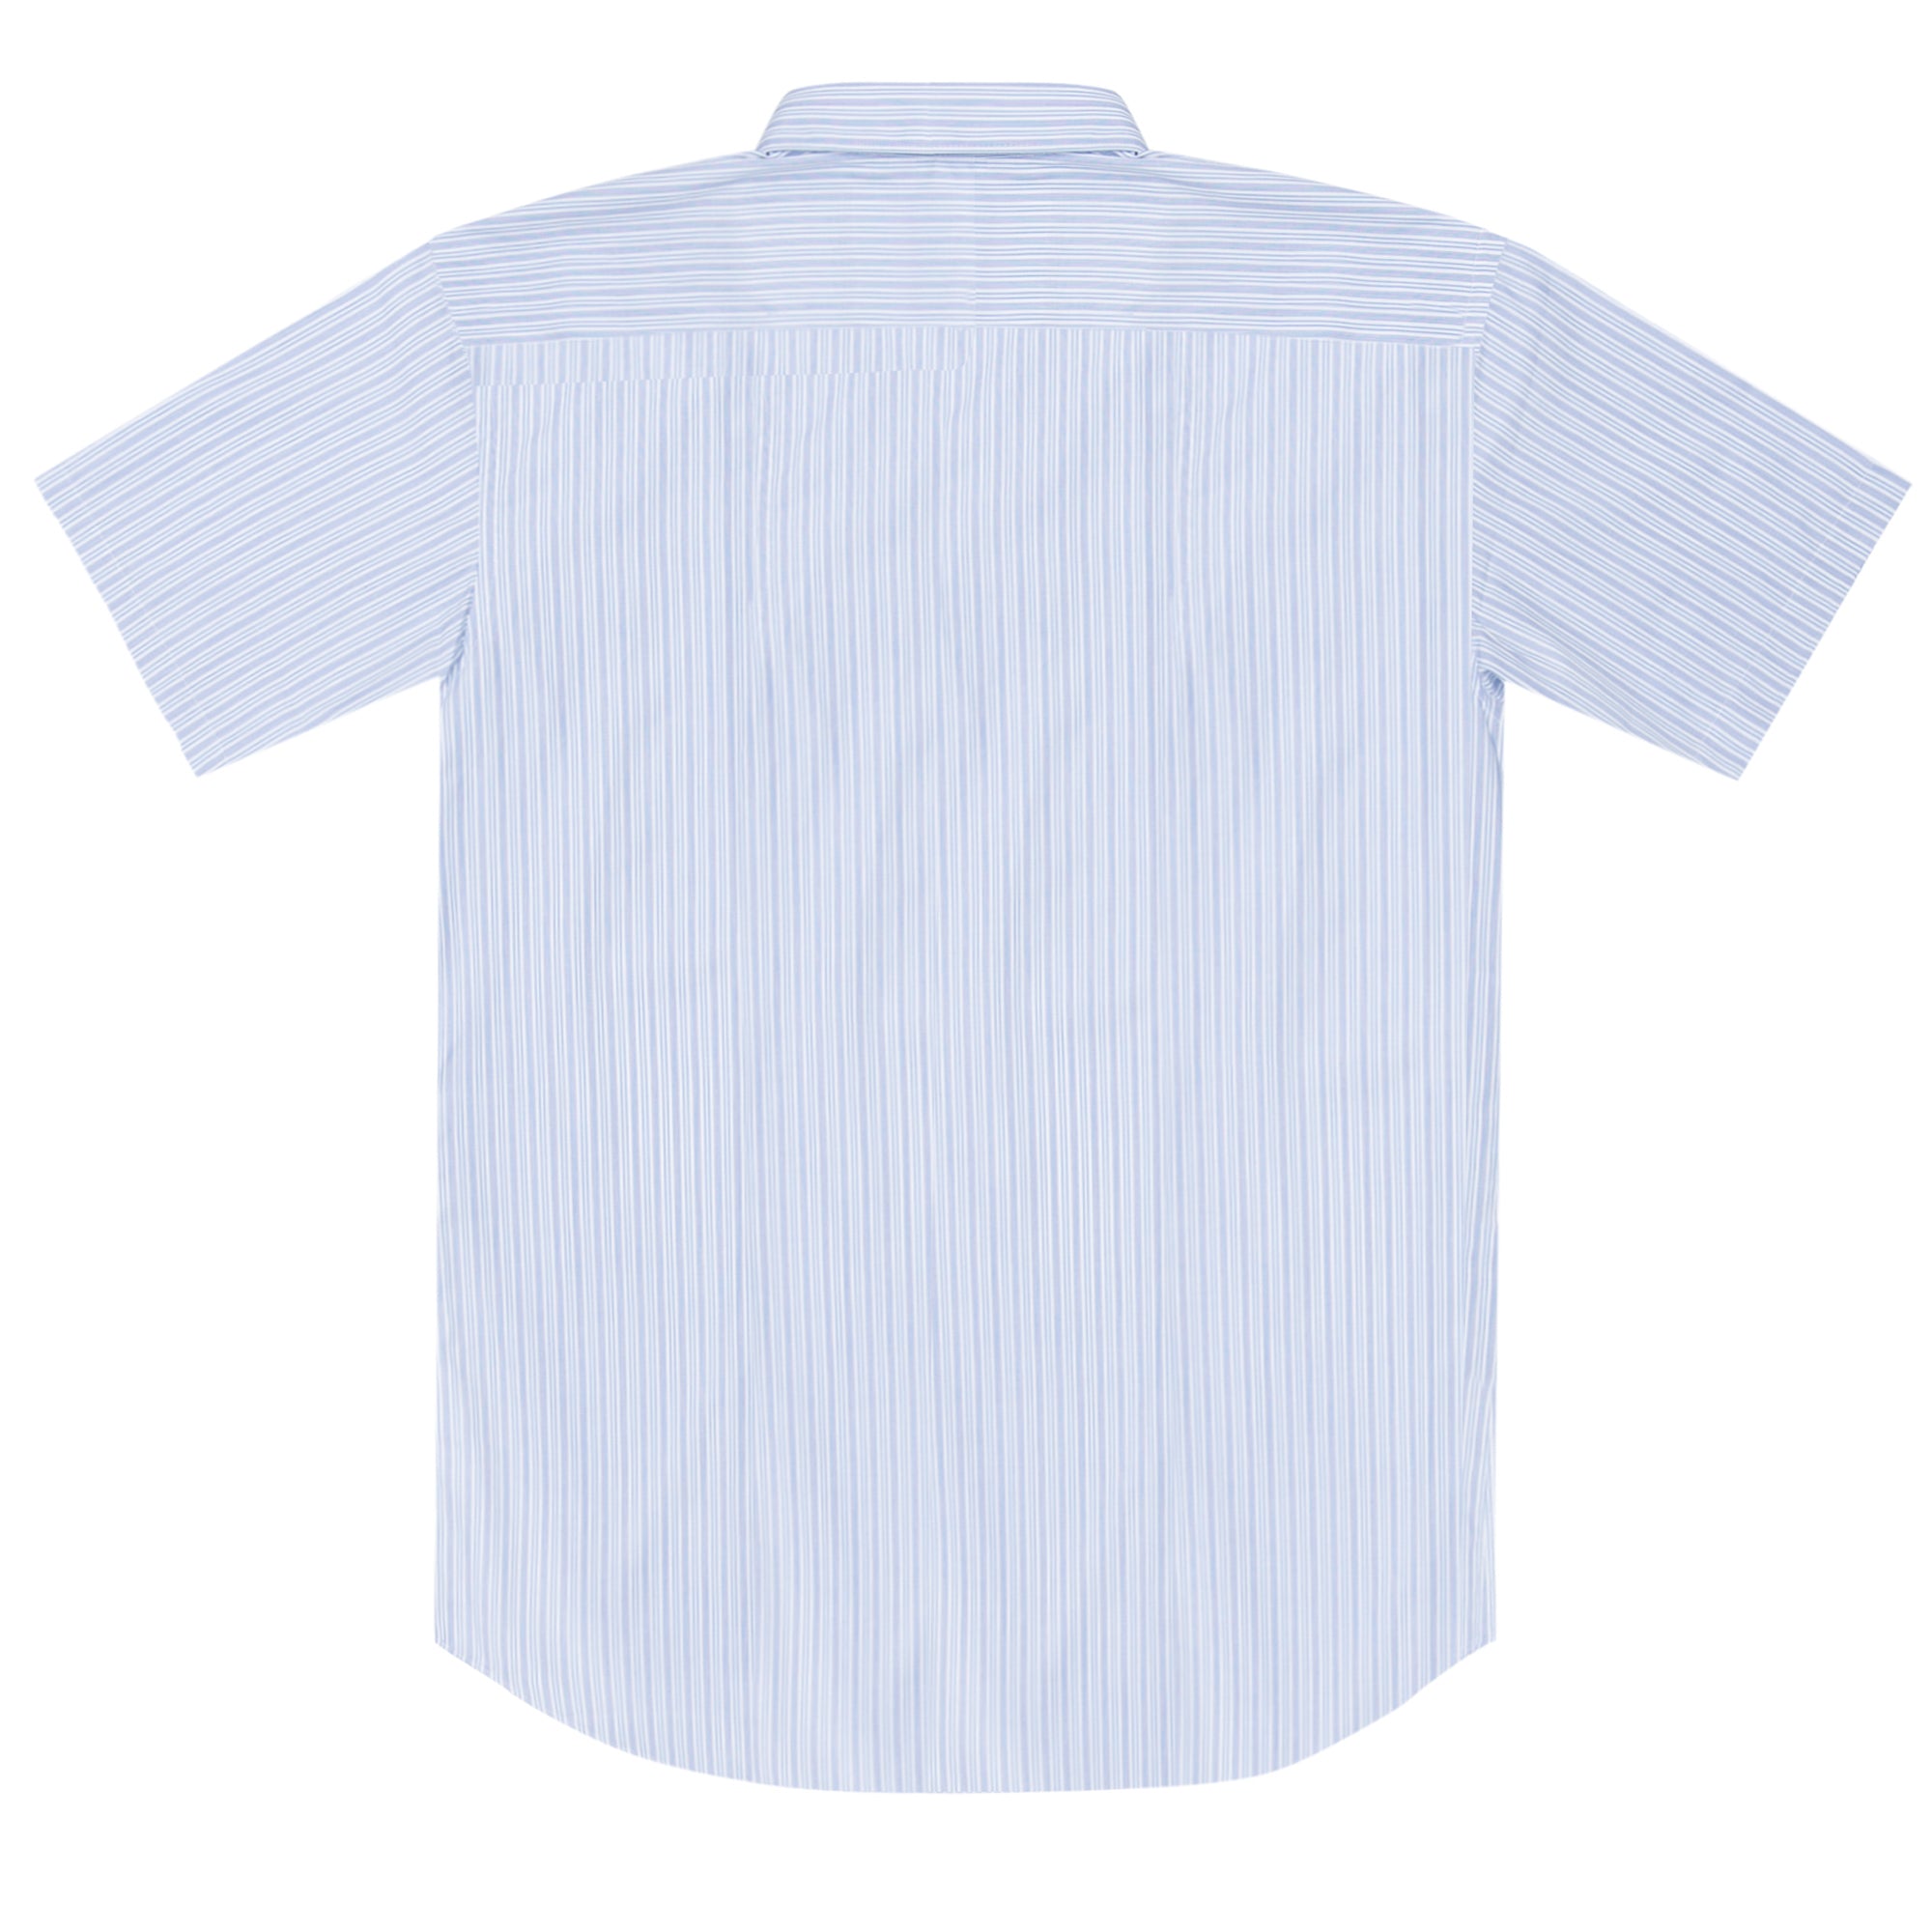 CDG SHIRT FOREVER - Cotton S/S Shirt CDGS7STA - (46 Stripes) view 2